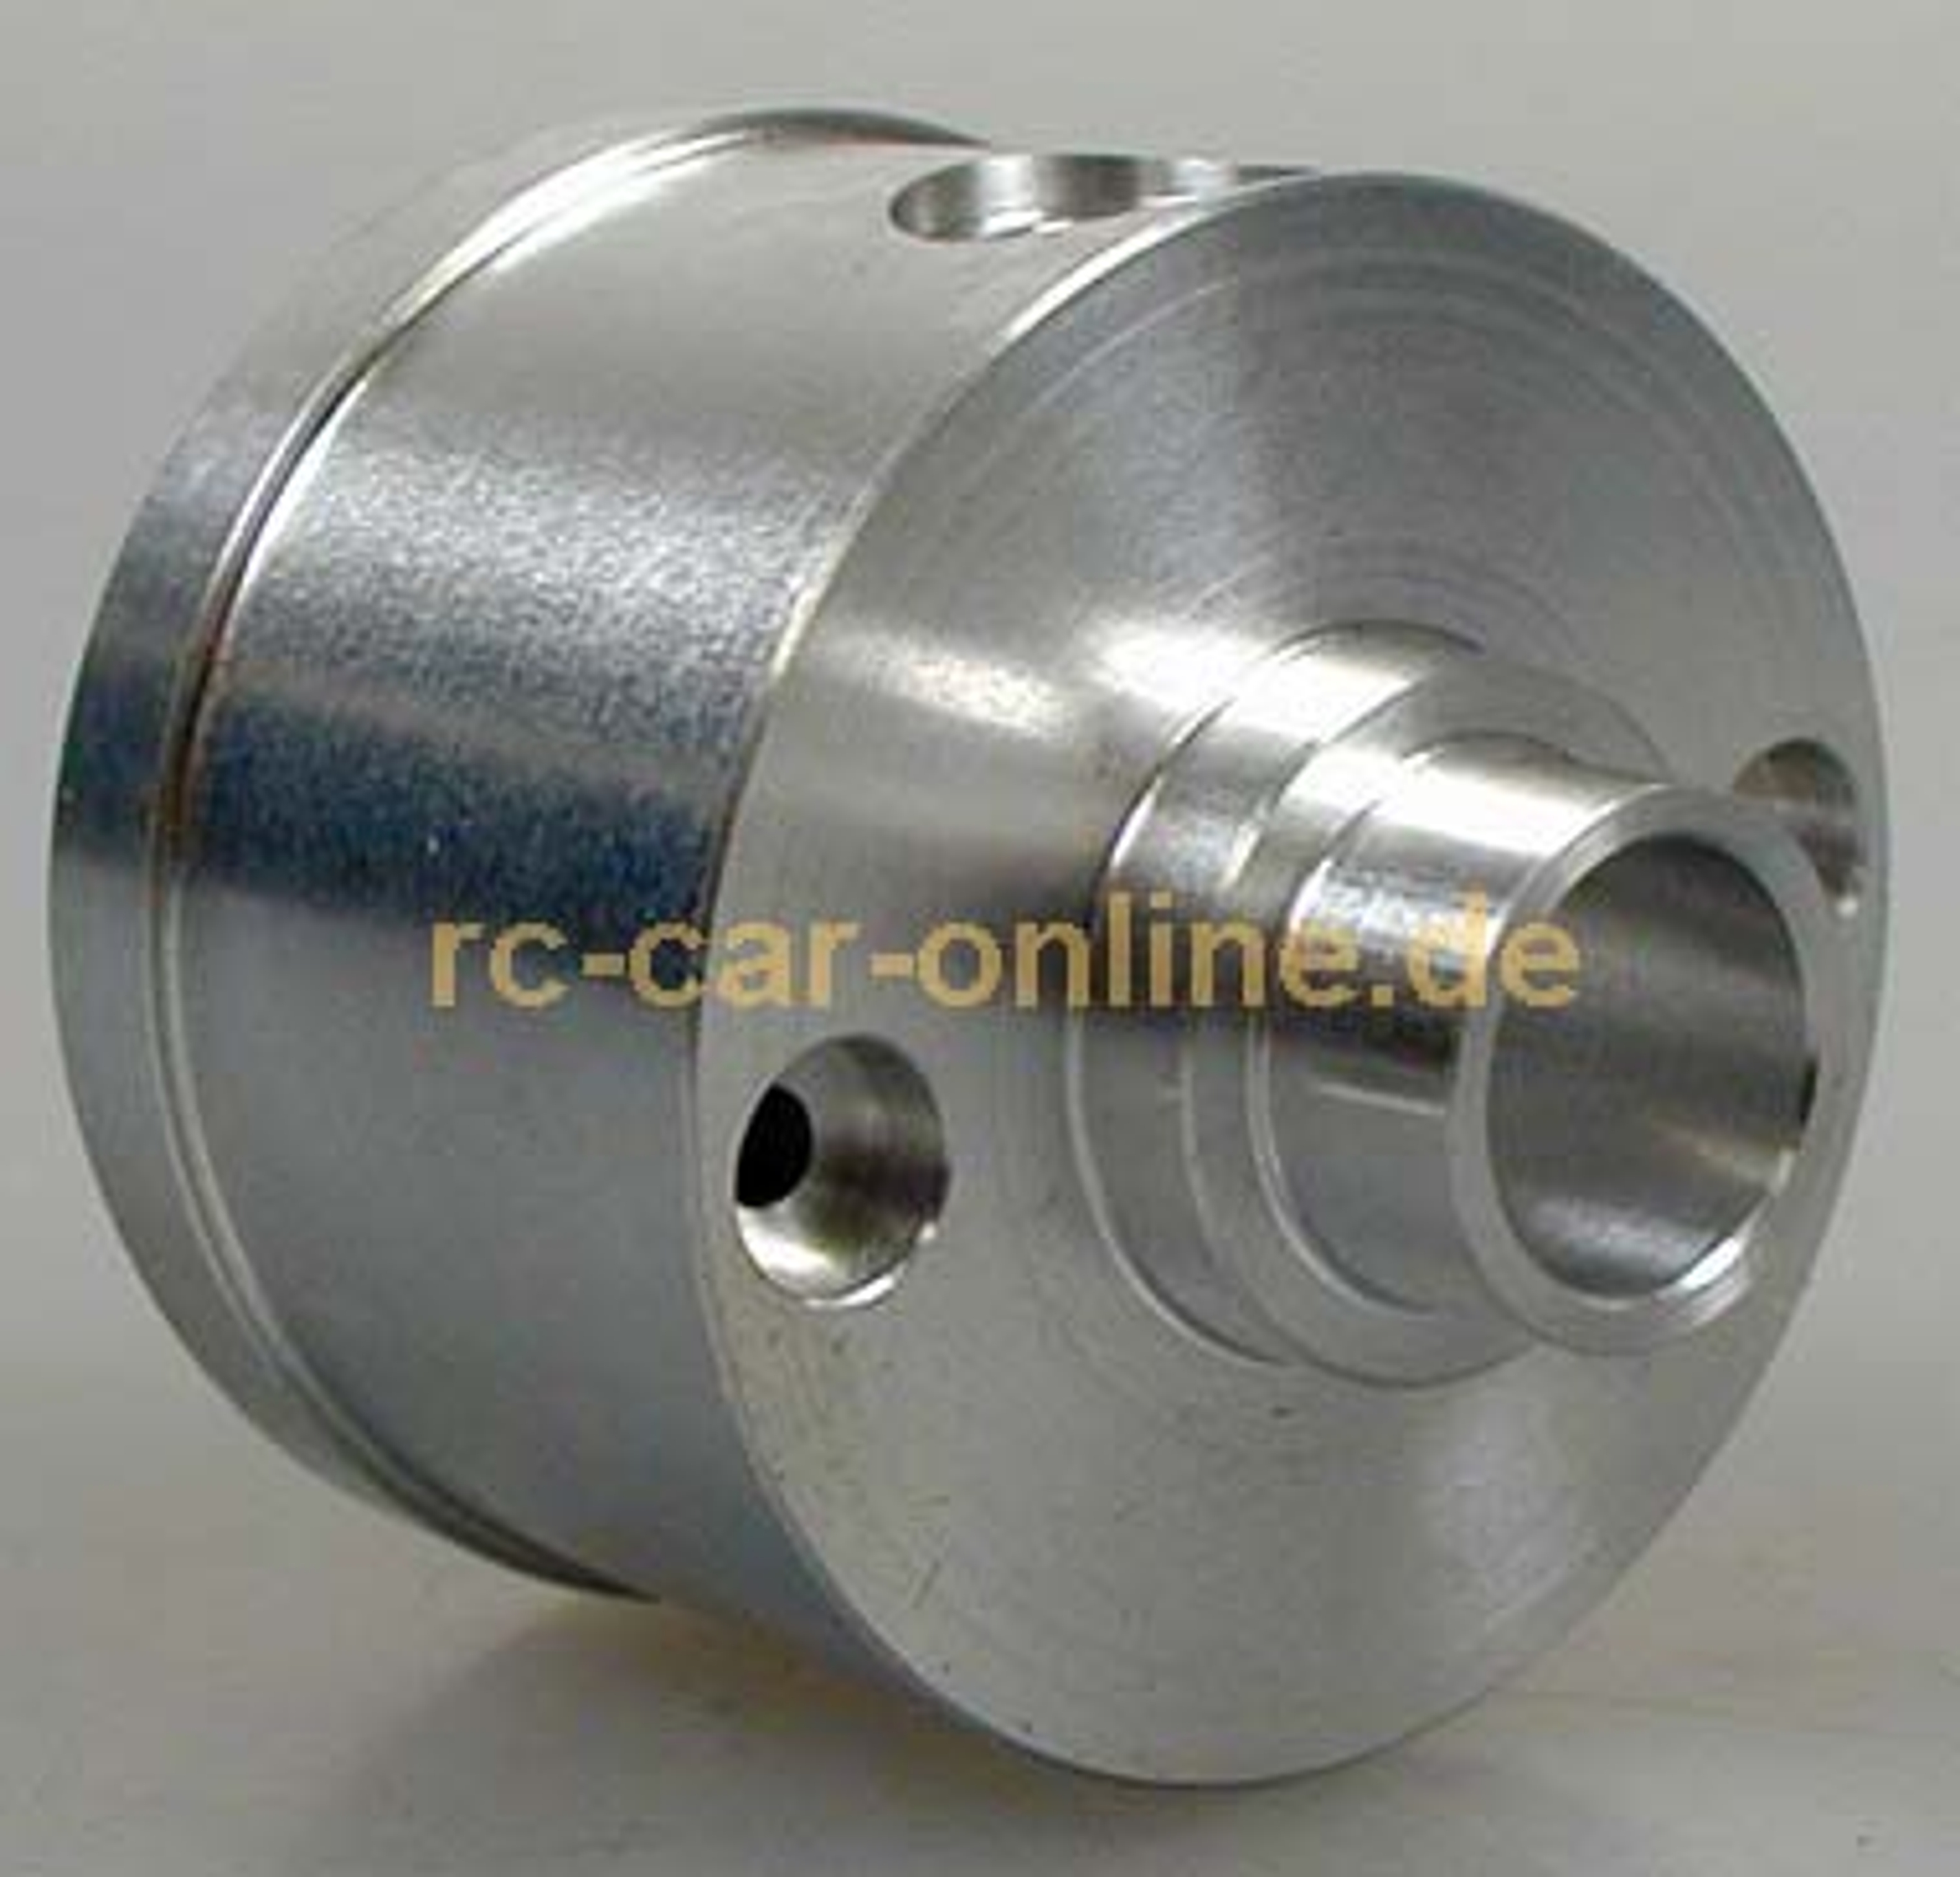 8600/02 FG Alloy case B for visc. differential - 1pce.